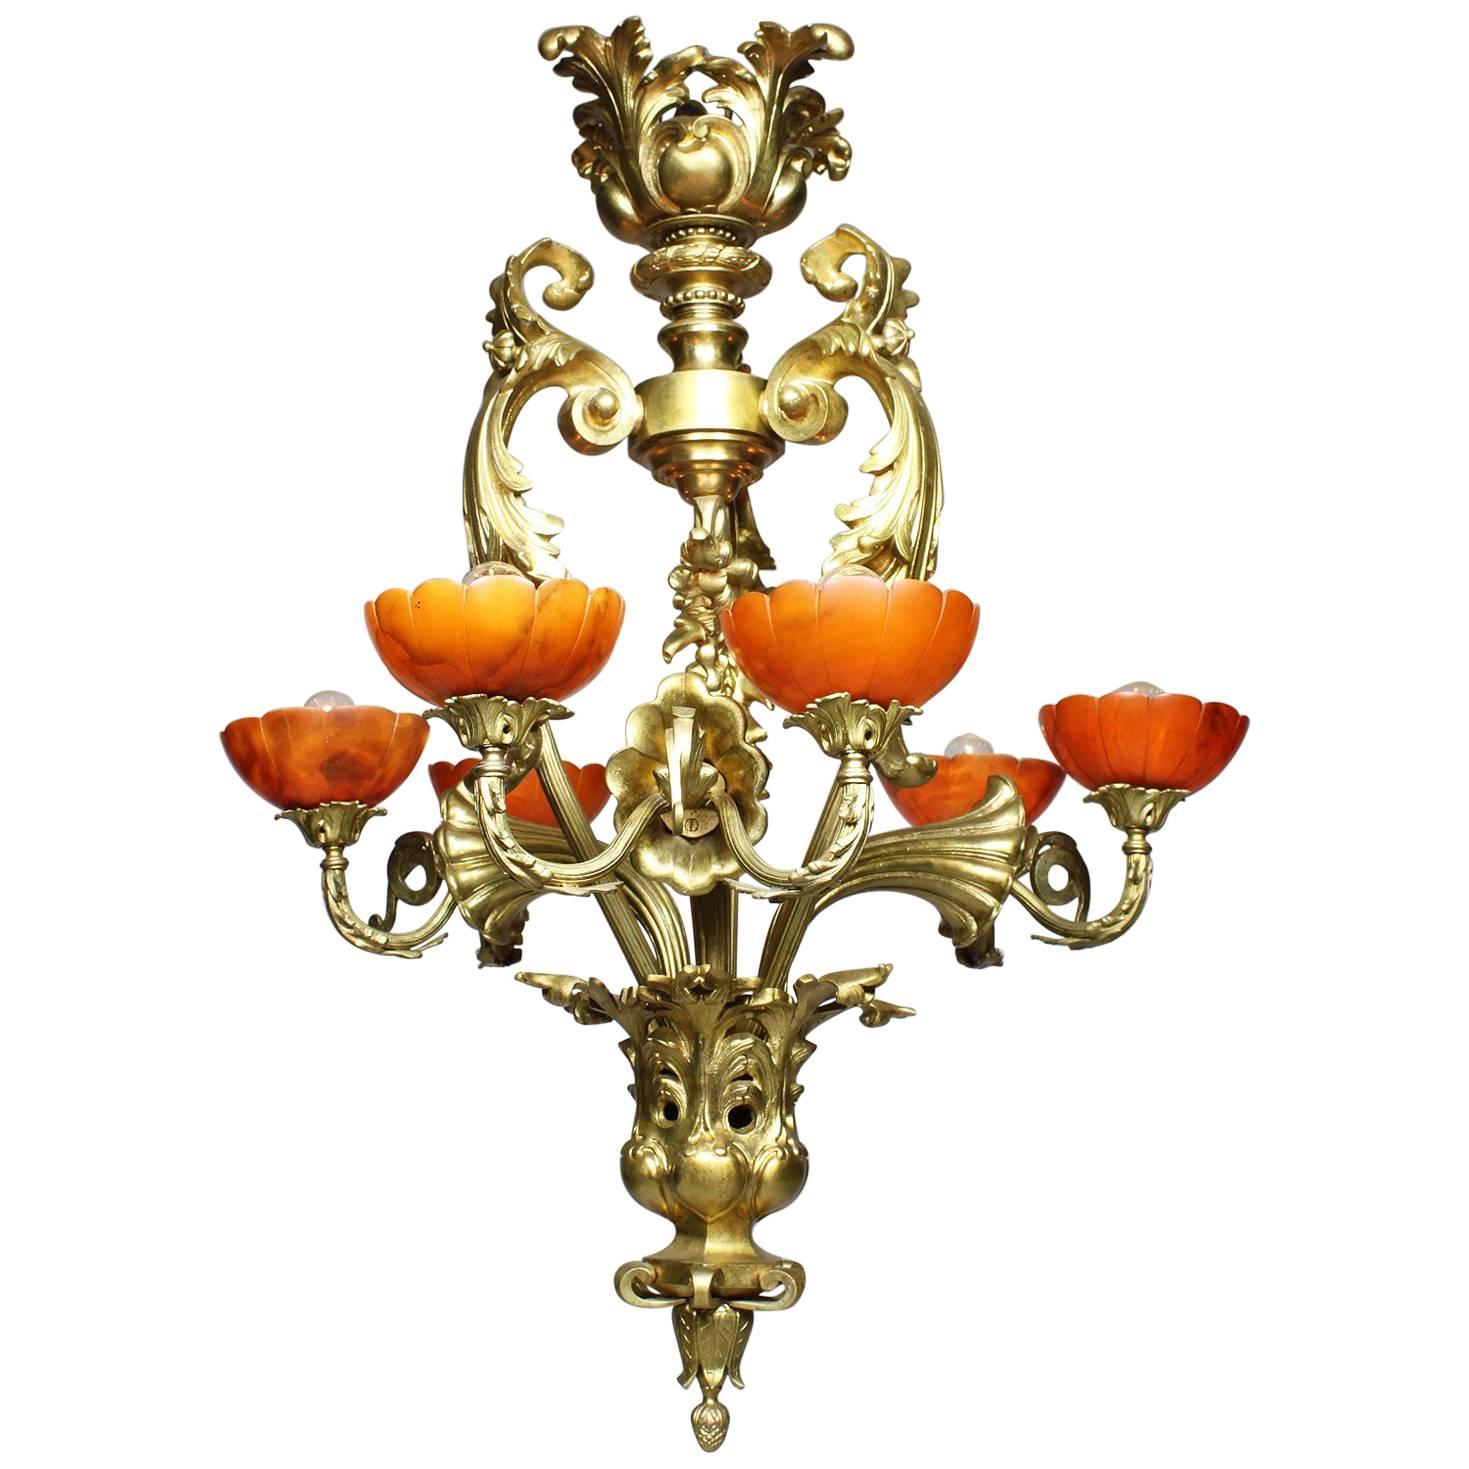 French Belle Époque Early 20th Century Gilt-Bronze & Alabaster Lilies Chandelier